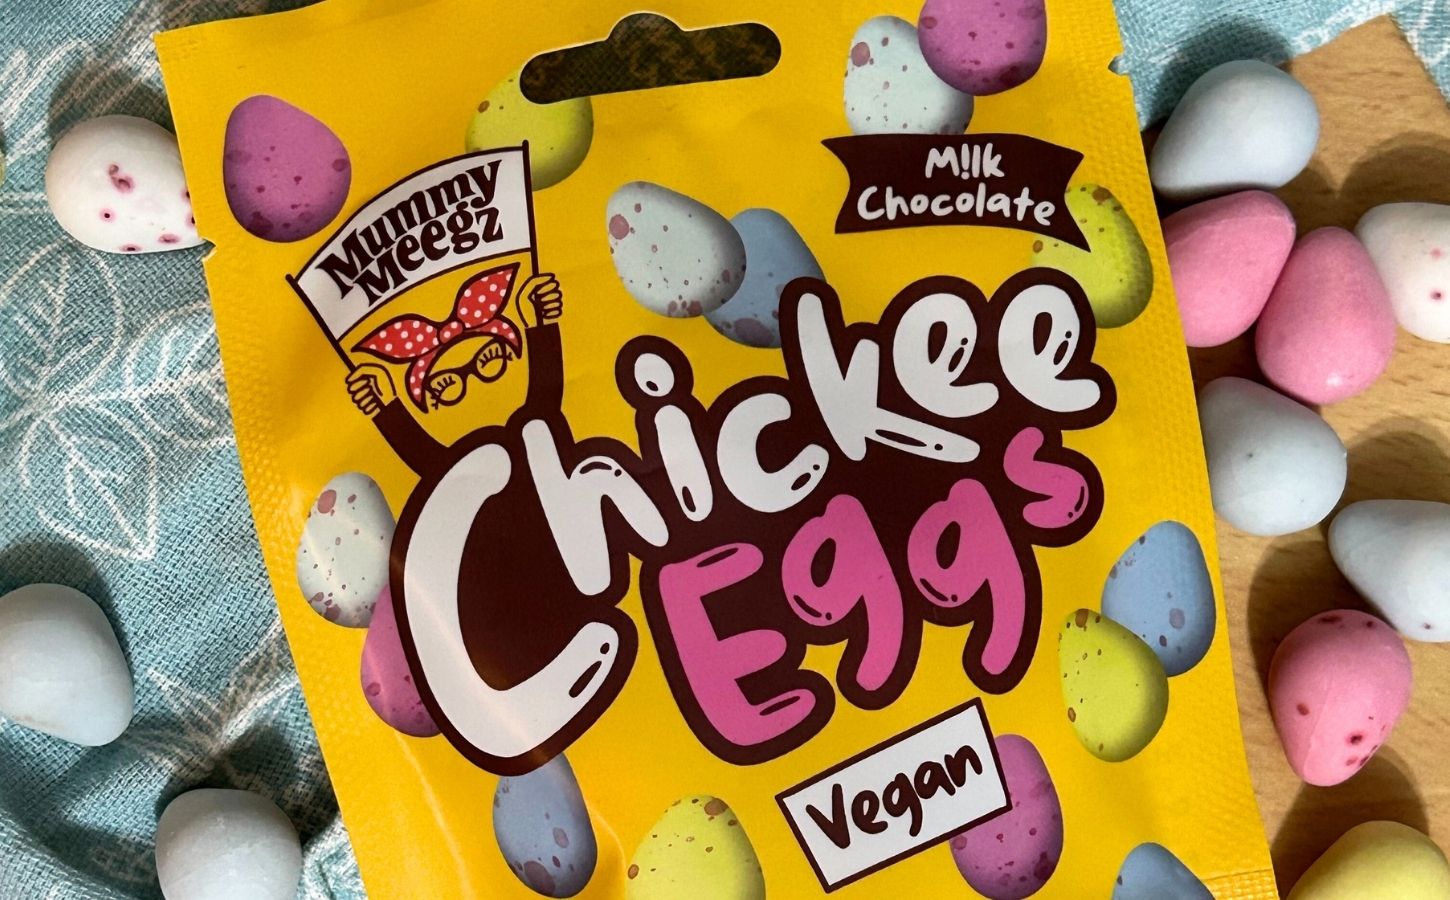 Mummy Meegz Chickee Eggs, available in time for Easter